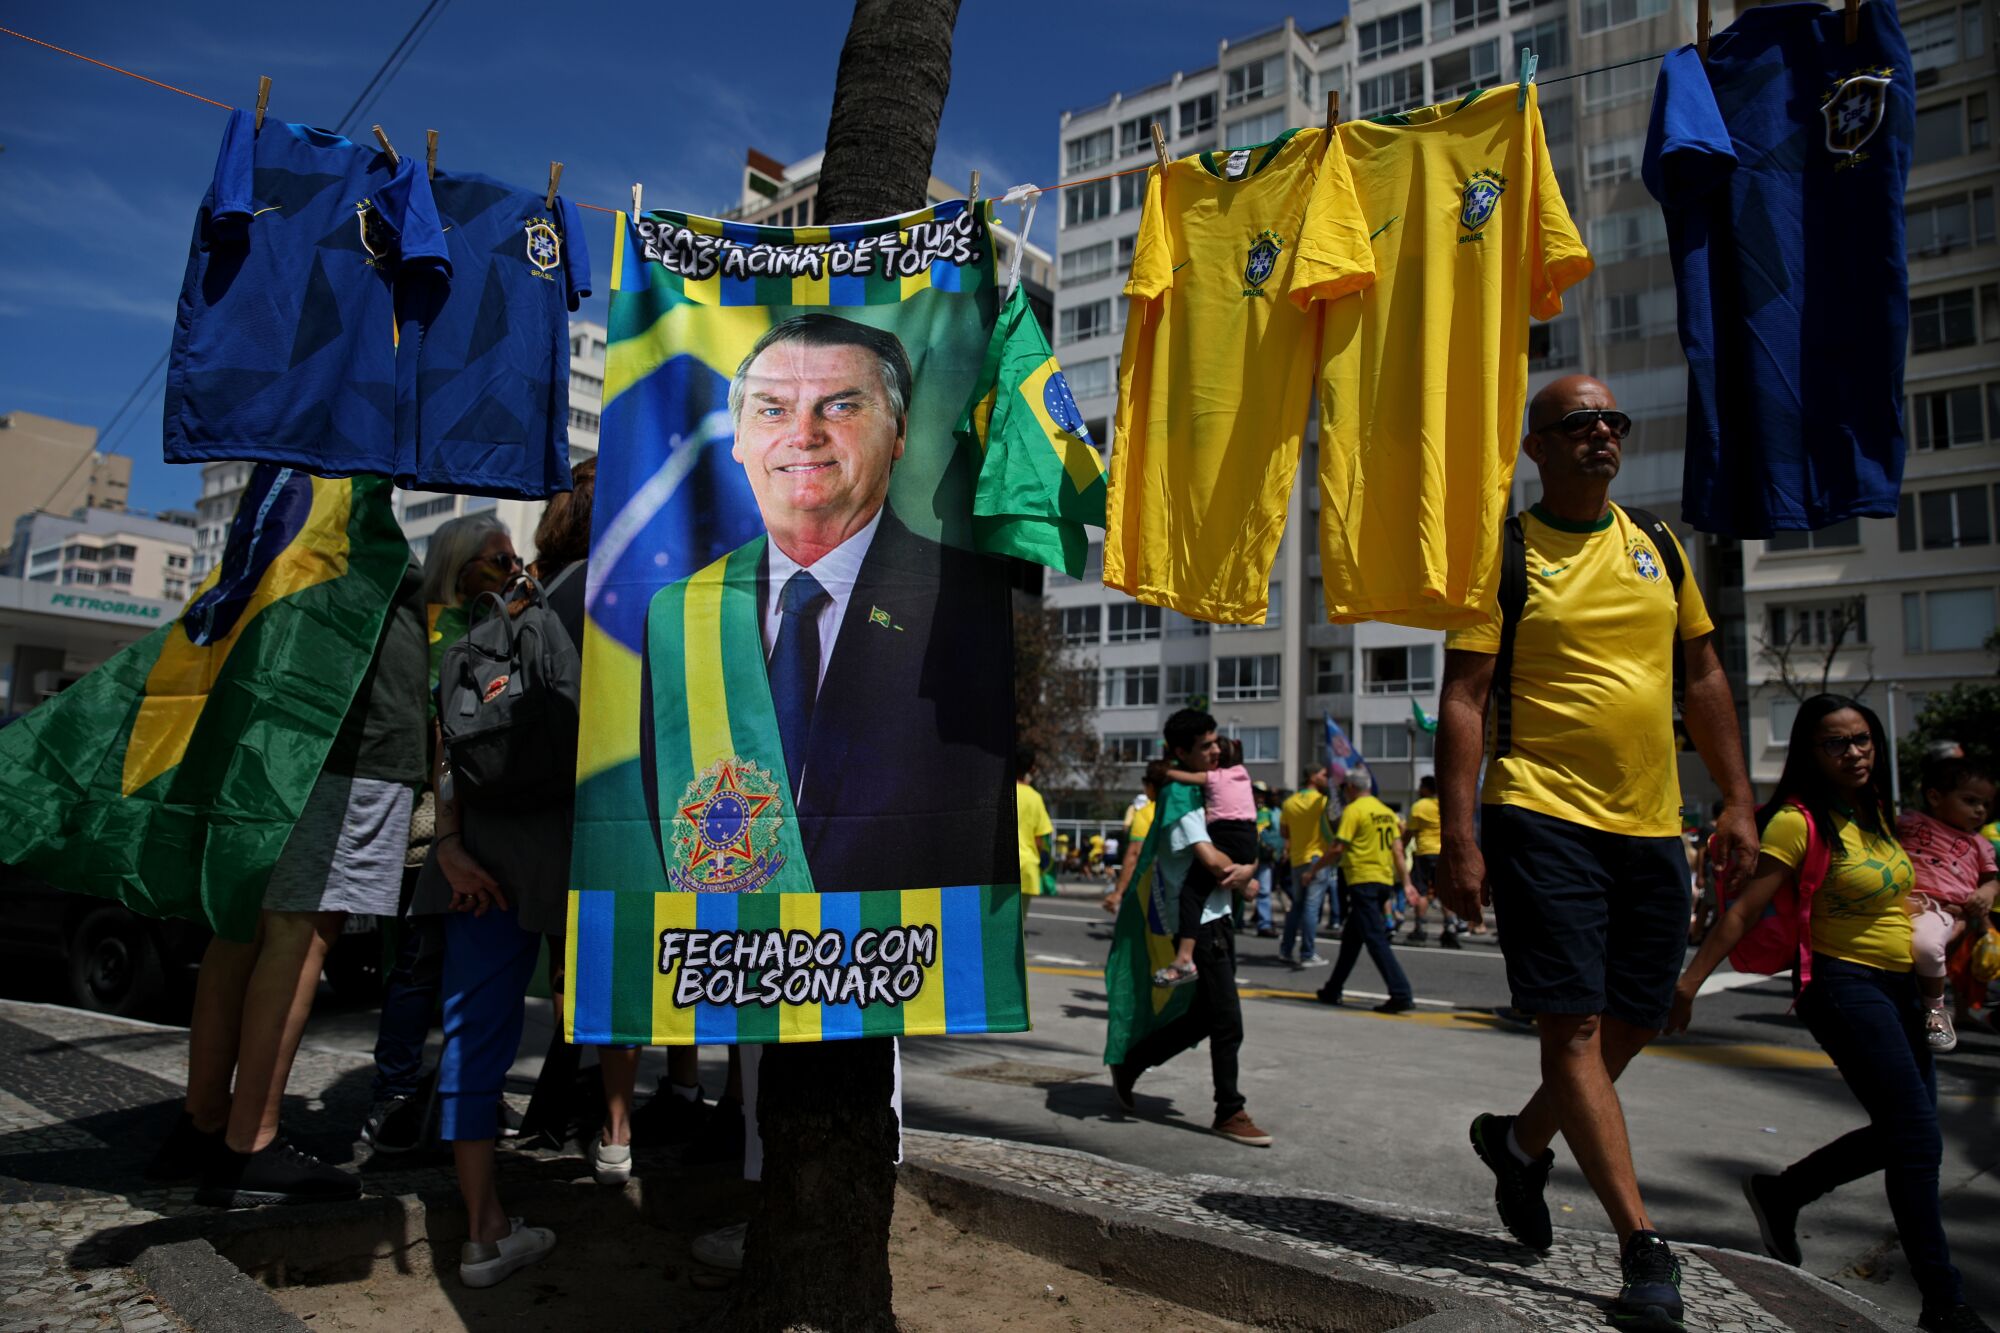  A banner hanging by the roadside bears the image of a man in a suit and tie, wearing a green-and-yellow sash 